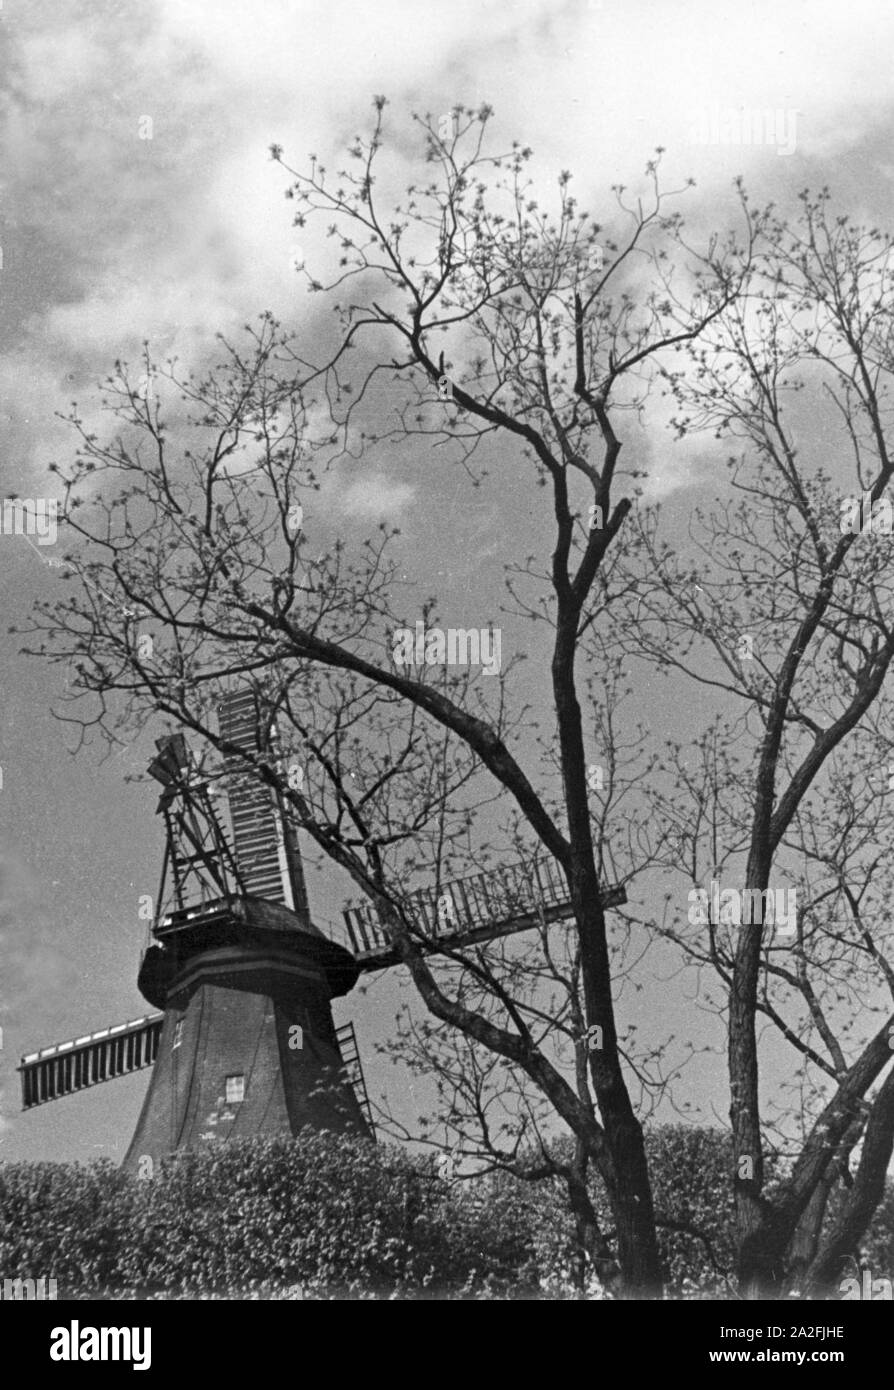 Windmühle in Frühling, Deutschland 1930er Jahre. Windmill in spring time, Germany 1930s. Stock Photo